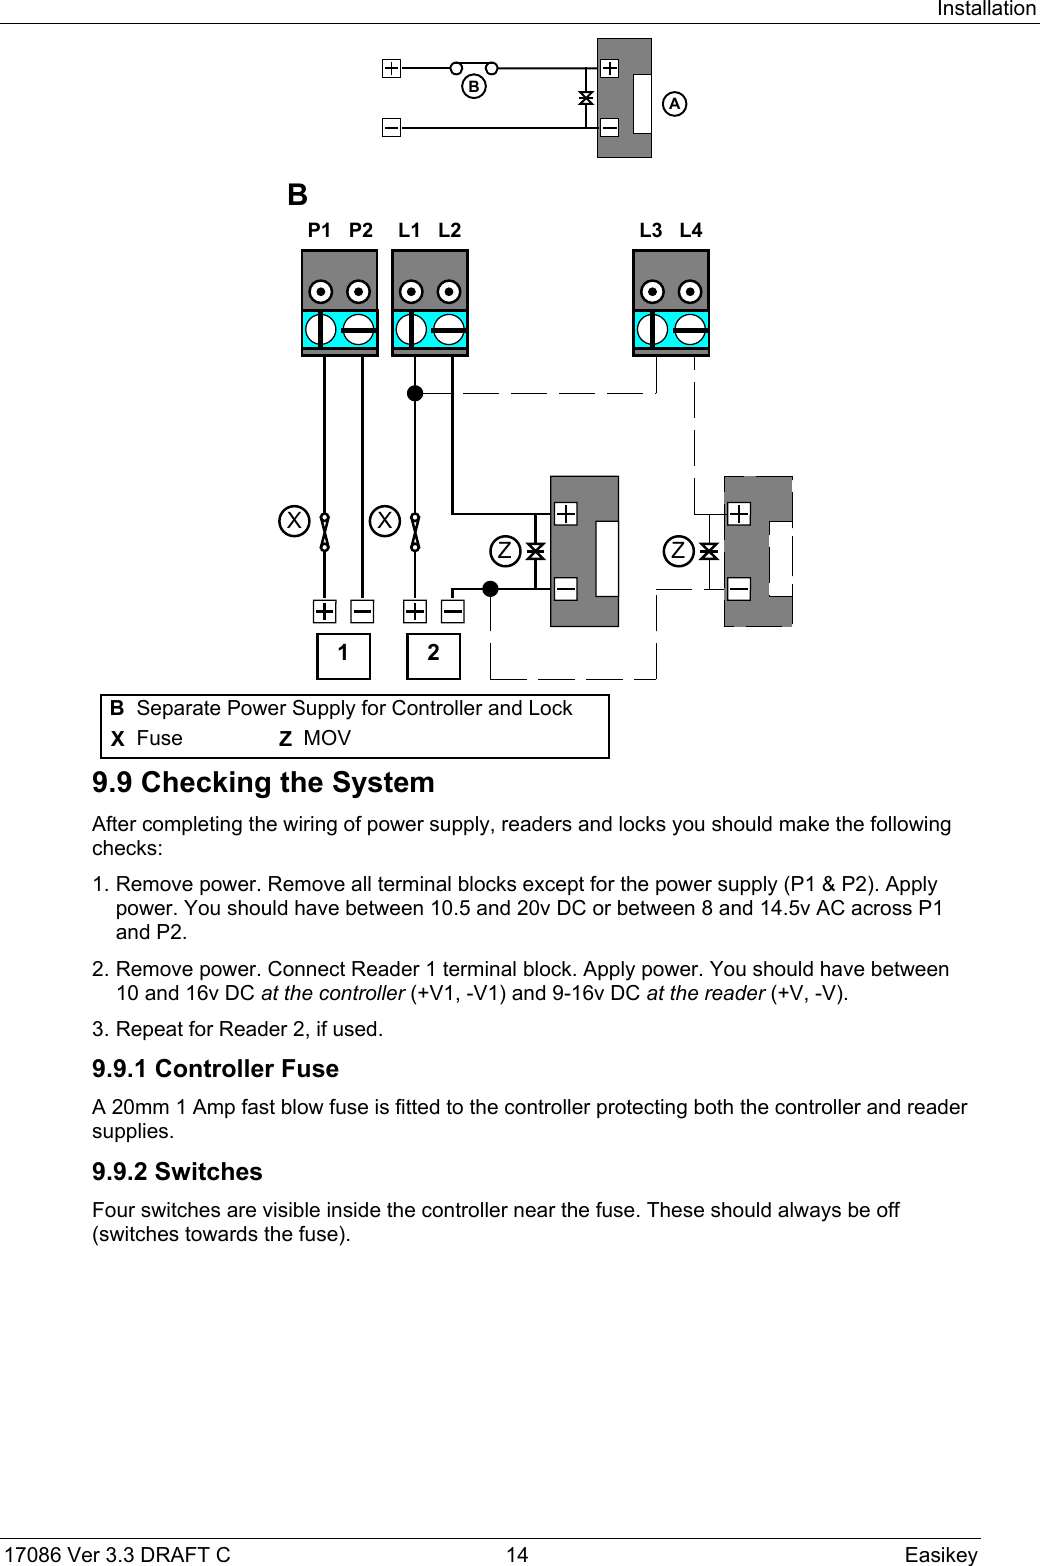 Installation17086 Ver 3.3 DRAFT C  14 EasikeyBA P1   P2  L1   L2  L3   L4Z ZXXB1 2BSeparate Power Supply for Controller and LockXFuse ZMOV9.9 Checking the SystemAfter completing the wiring of power supply, readers and locks you should make the followingchecks:1. Remove power. Remove all terminal blocks except for the power supply (P1 &amp; P2). Applypower. You should have between 10.5 and 20v DC or between 8 and 14.5v AC across P1and P2.2. Remove power. Connect Reader 1 terminal block. Apply power. You should have between10 and 16v DC at the controller (+V1, -V1) and 9-16v DC at the reader (+V, -V).3. Repeat for Reader 2, if used.9.9.1 Controller FuseA 20mm 1 Amp fast blow fuse is fitted to the controller protecting both the controller and readersupplies.9.9.2 SwitchesFour switches are visible inside the controller near the fuse. These should always be off(switches towards the fuse).